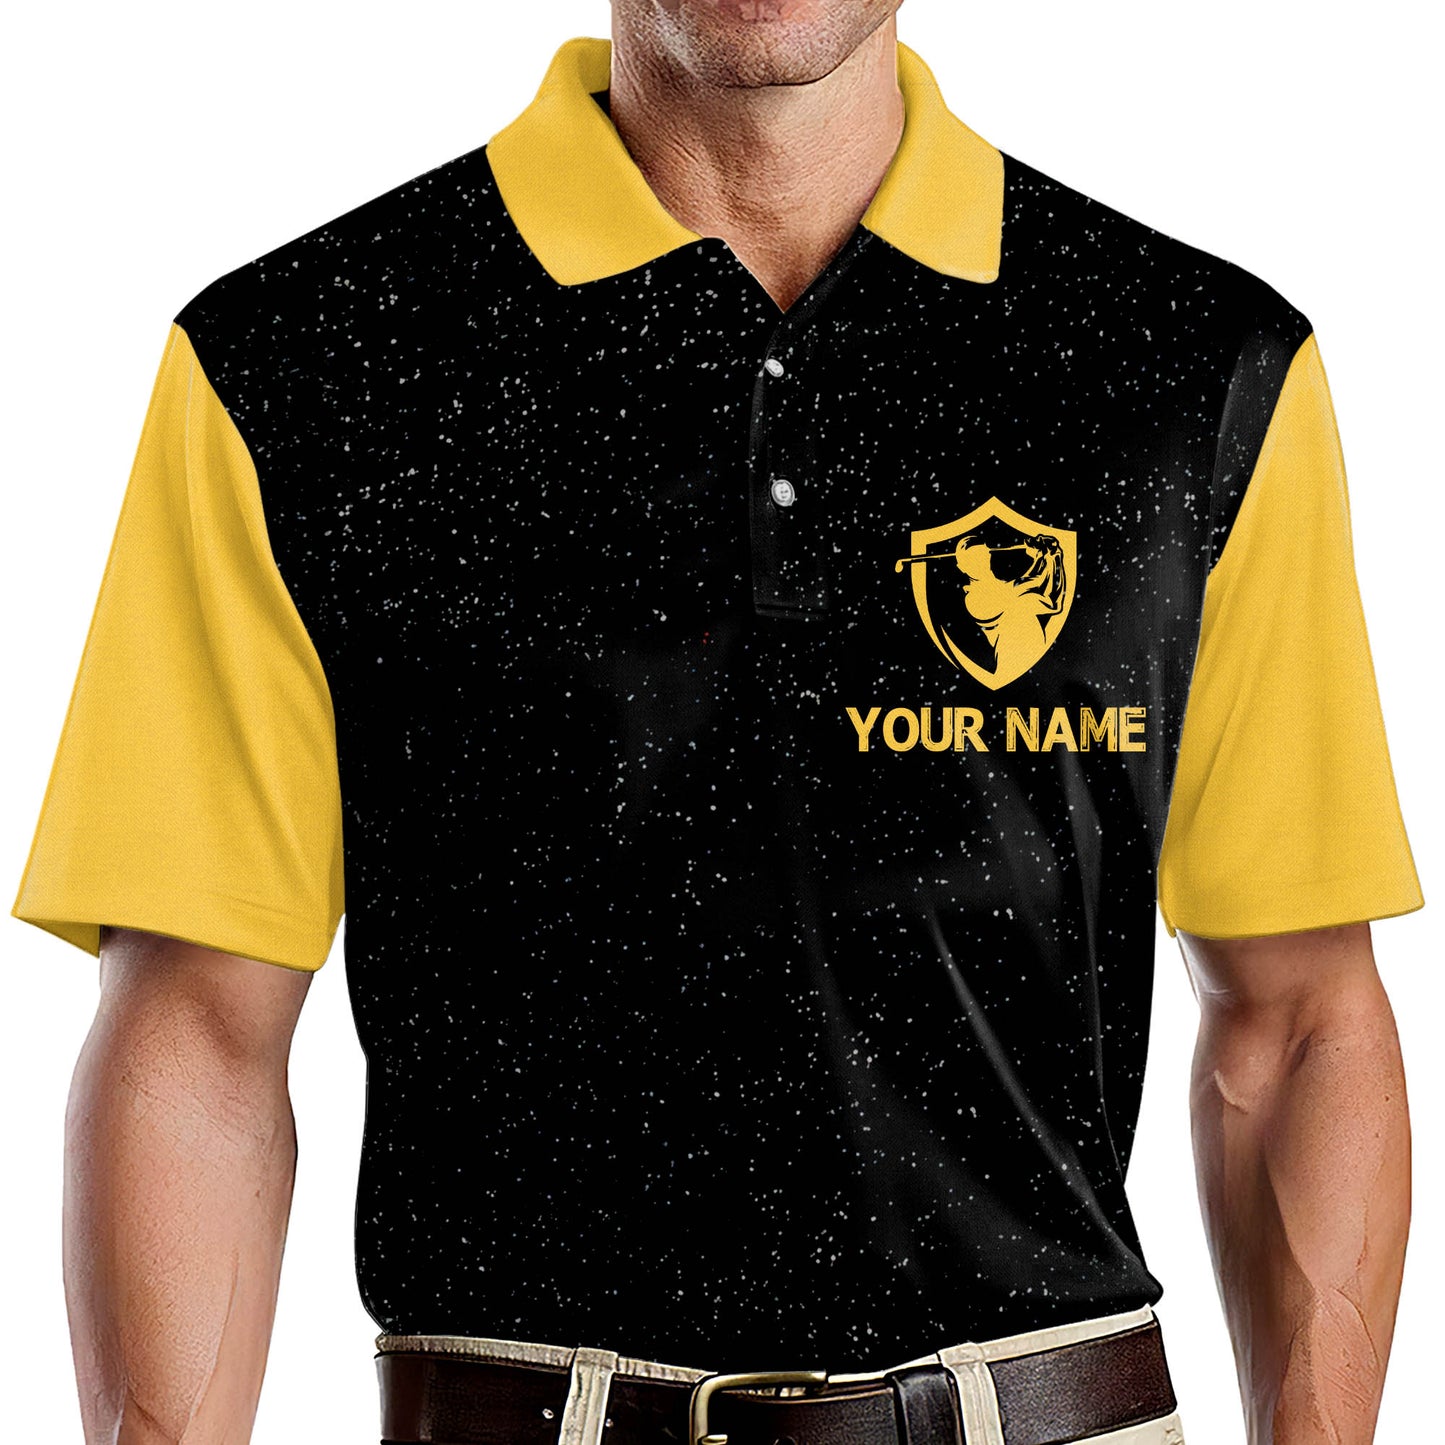 It Takes A Lot Of Balls To Golf The Way I Do Golf Polo Shirt GM0018